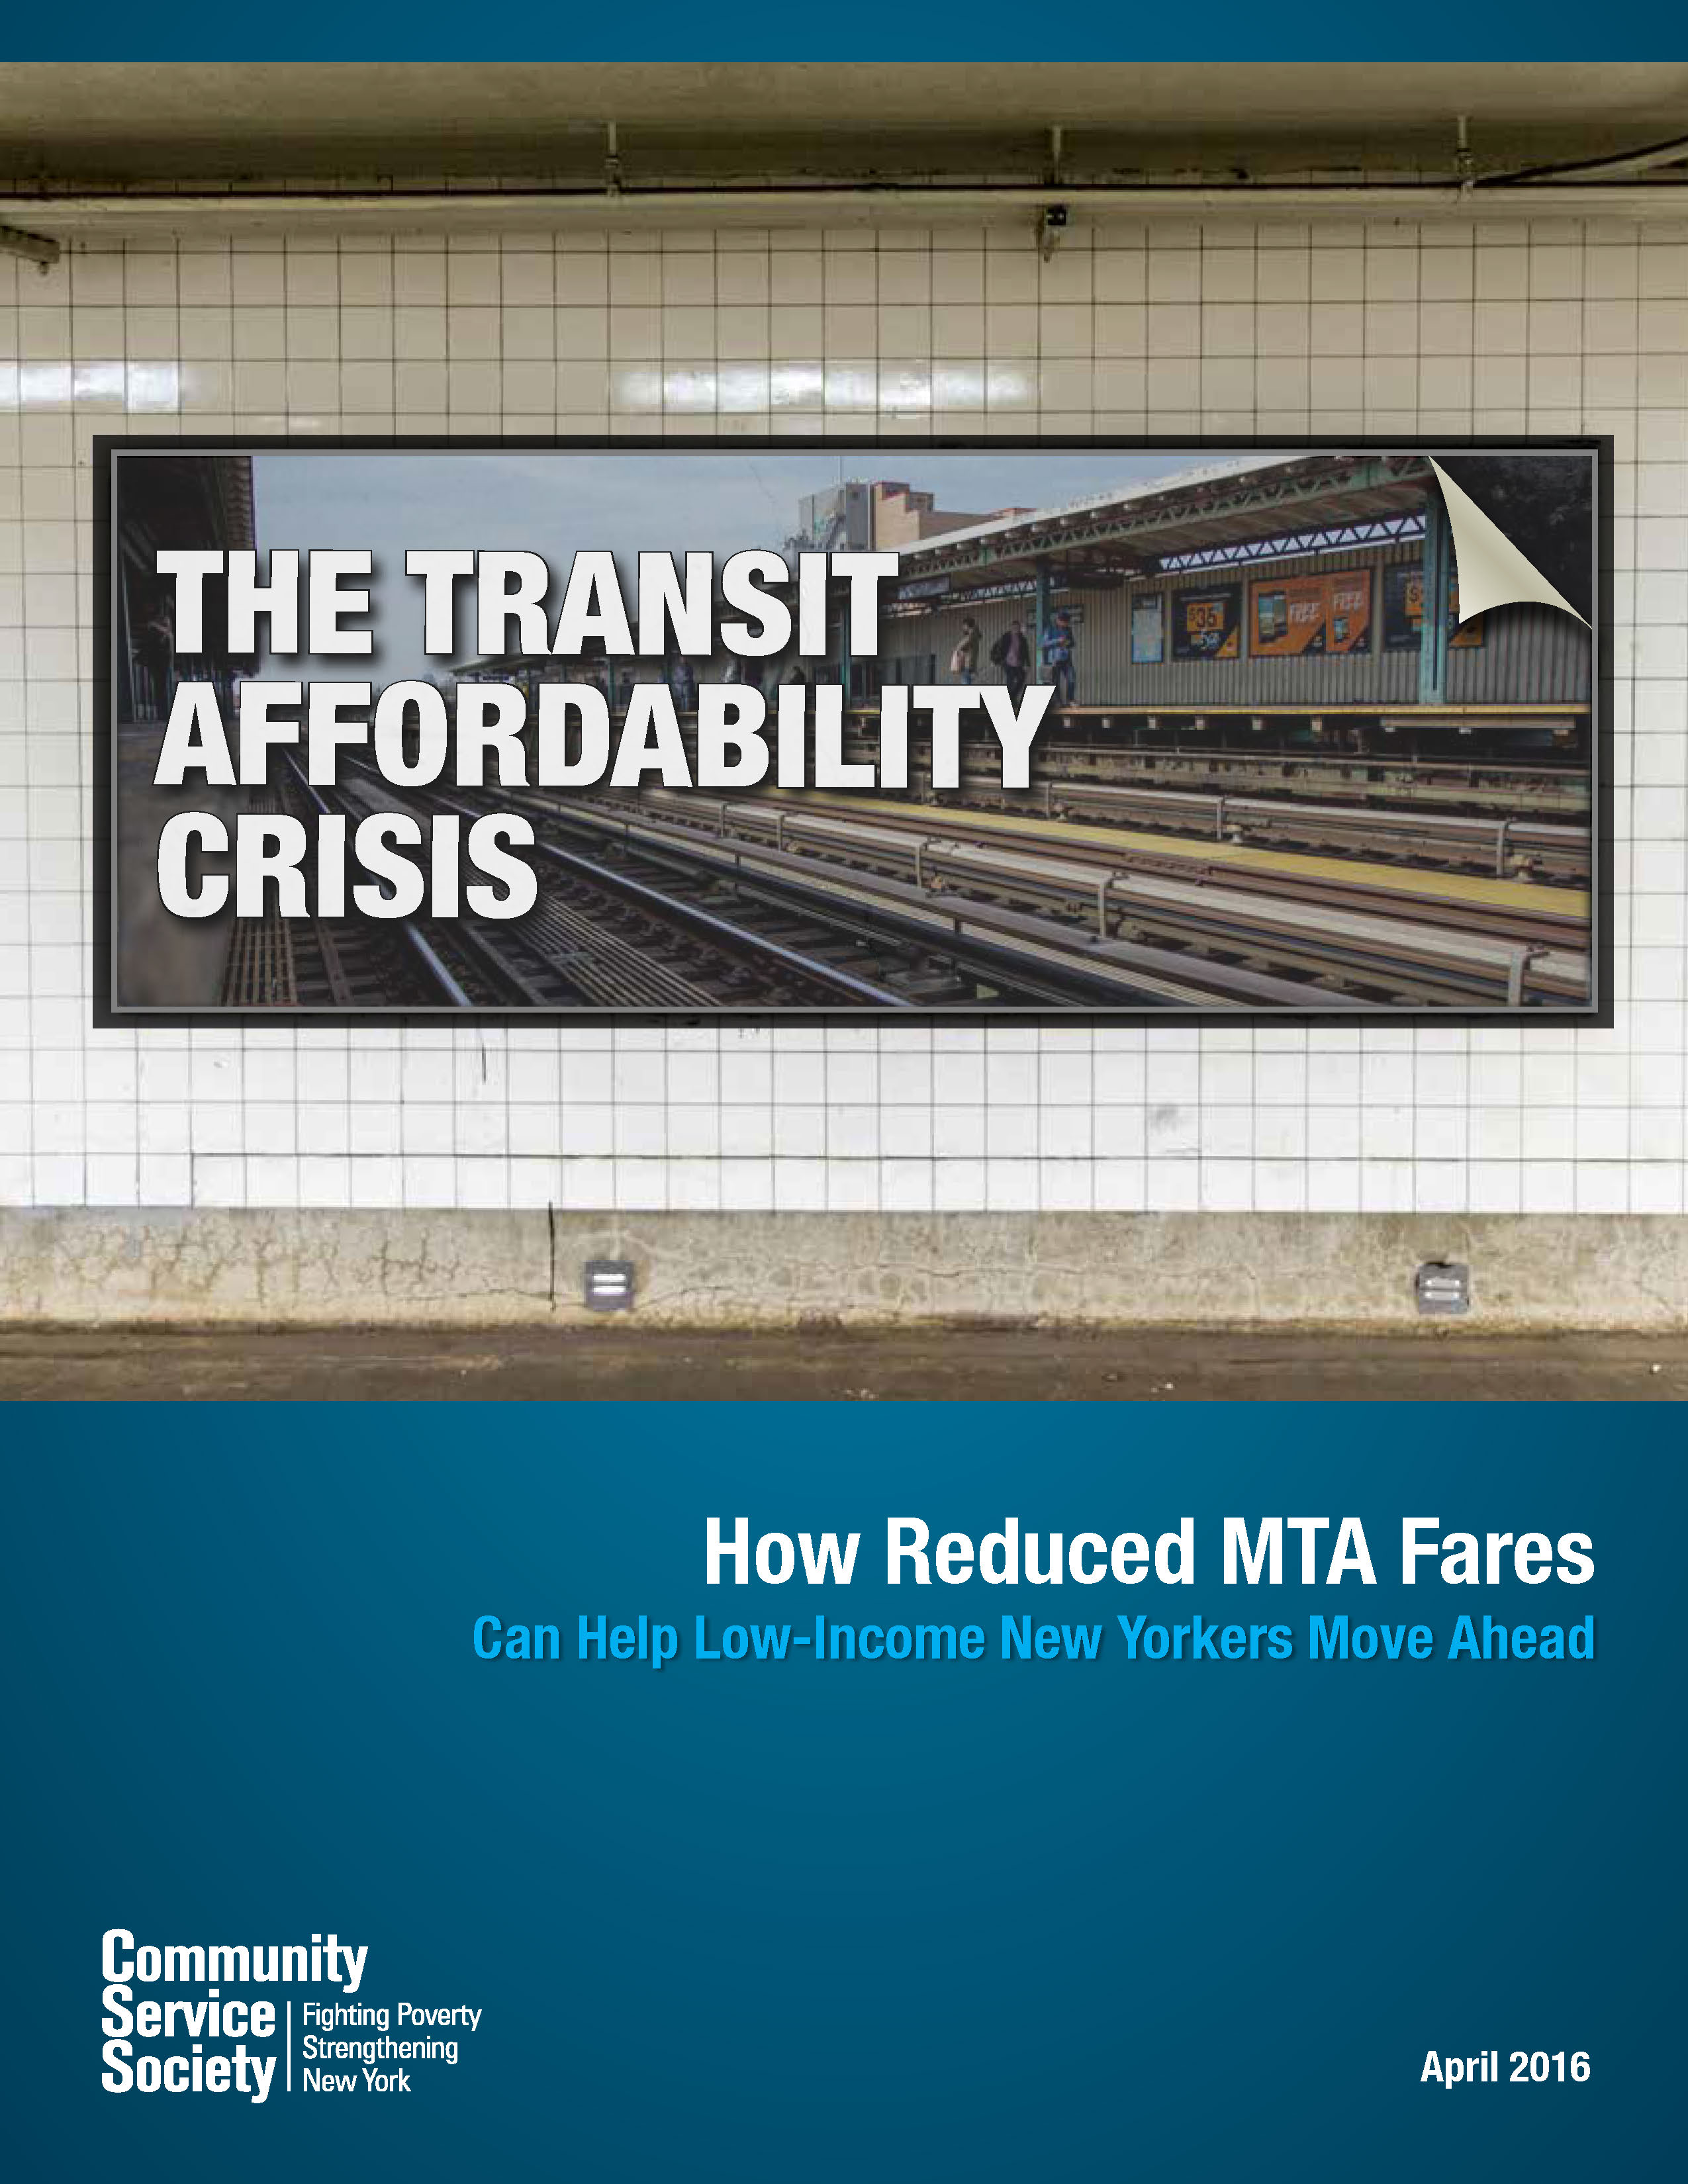 The Transit Affordability Crisis: How Reduced MTA Fares Can Help Low-Income New Yorkers Move Ahead